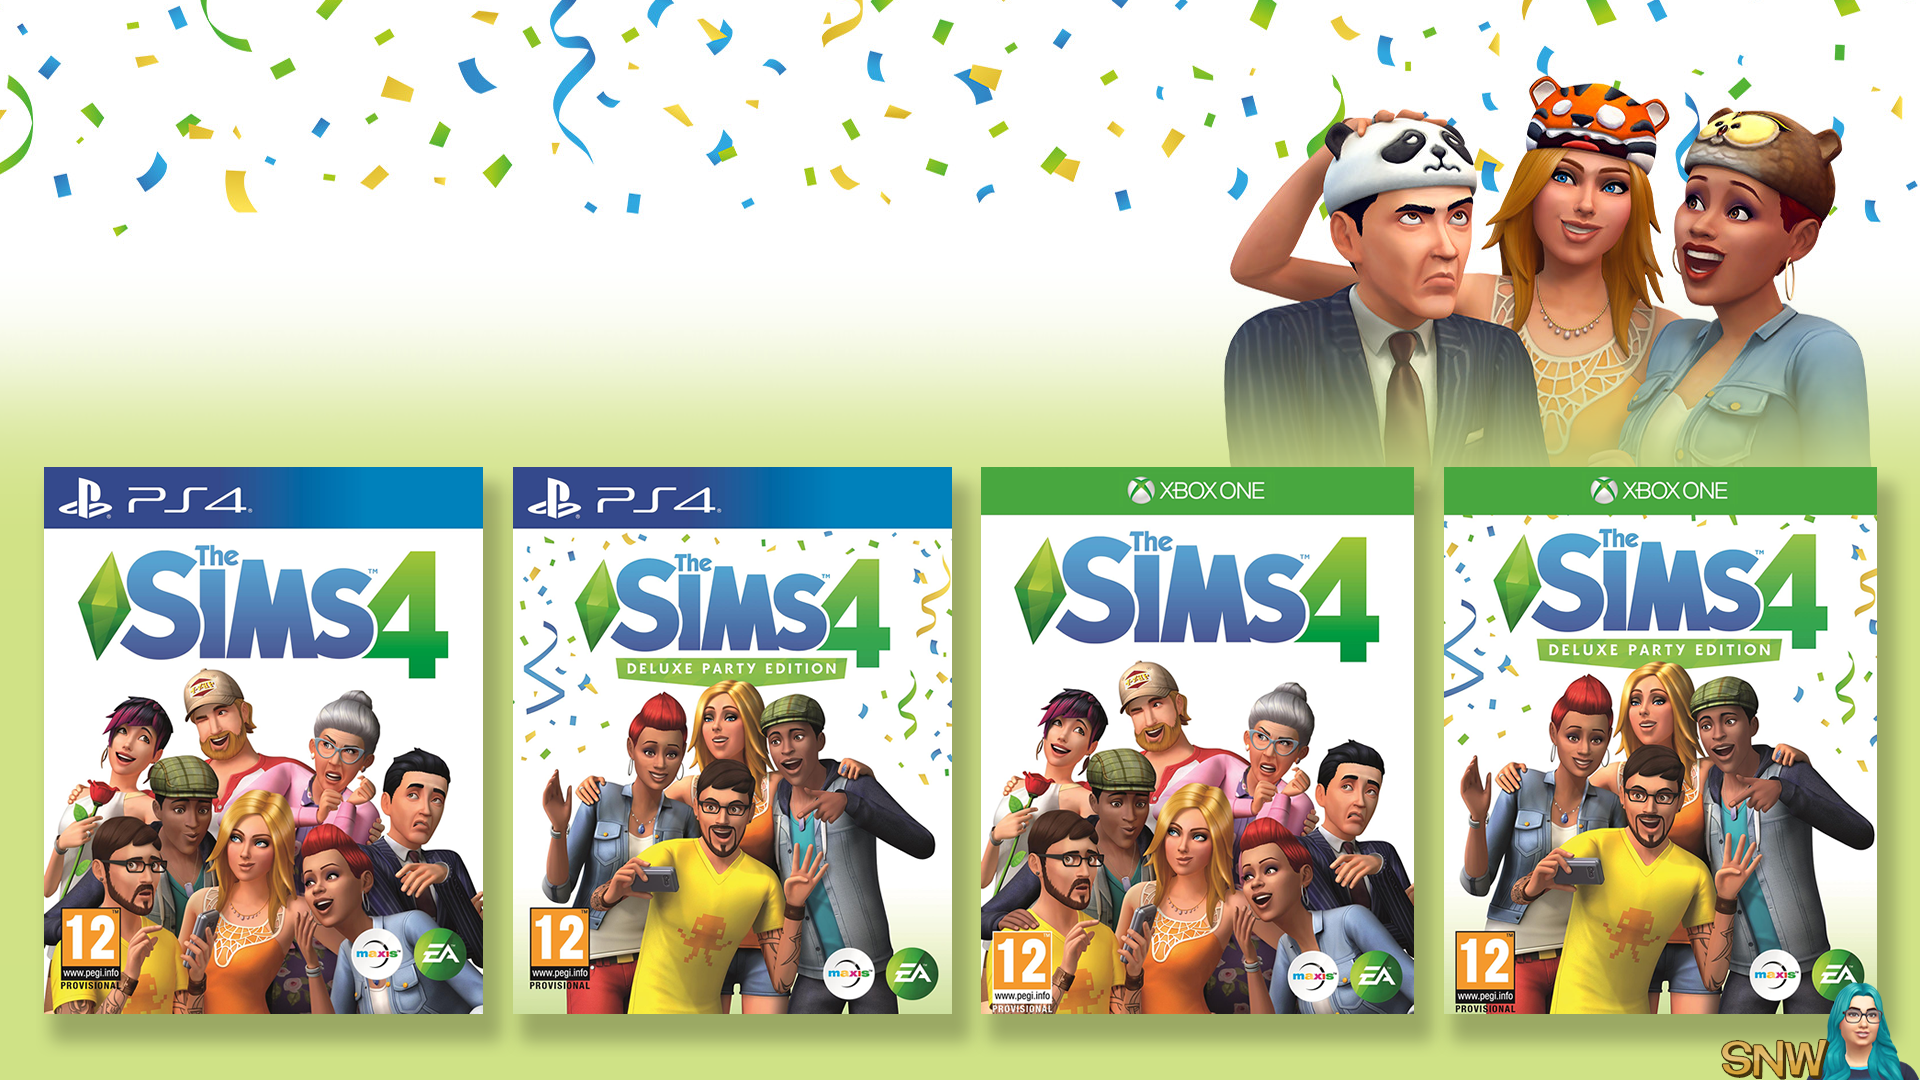 The Sims 4 on consoles PS4 Xbox One press release